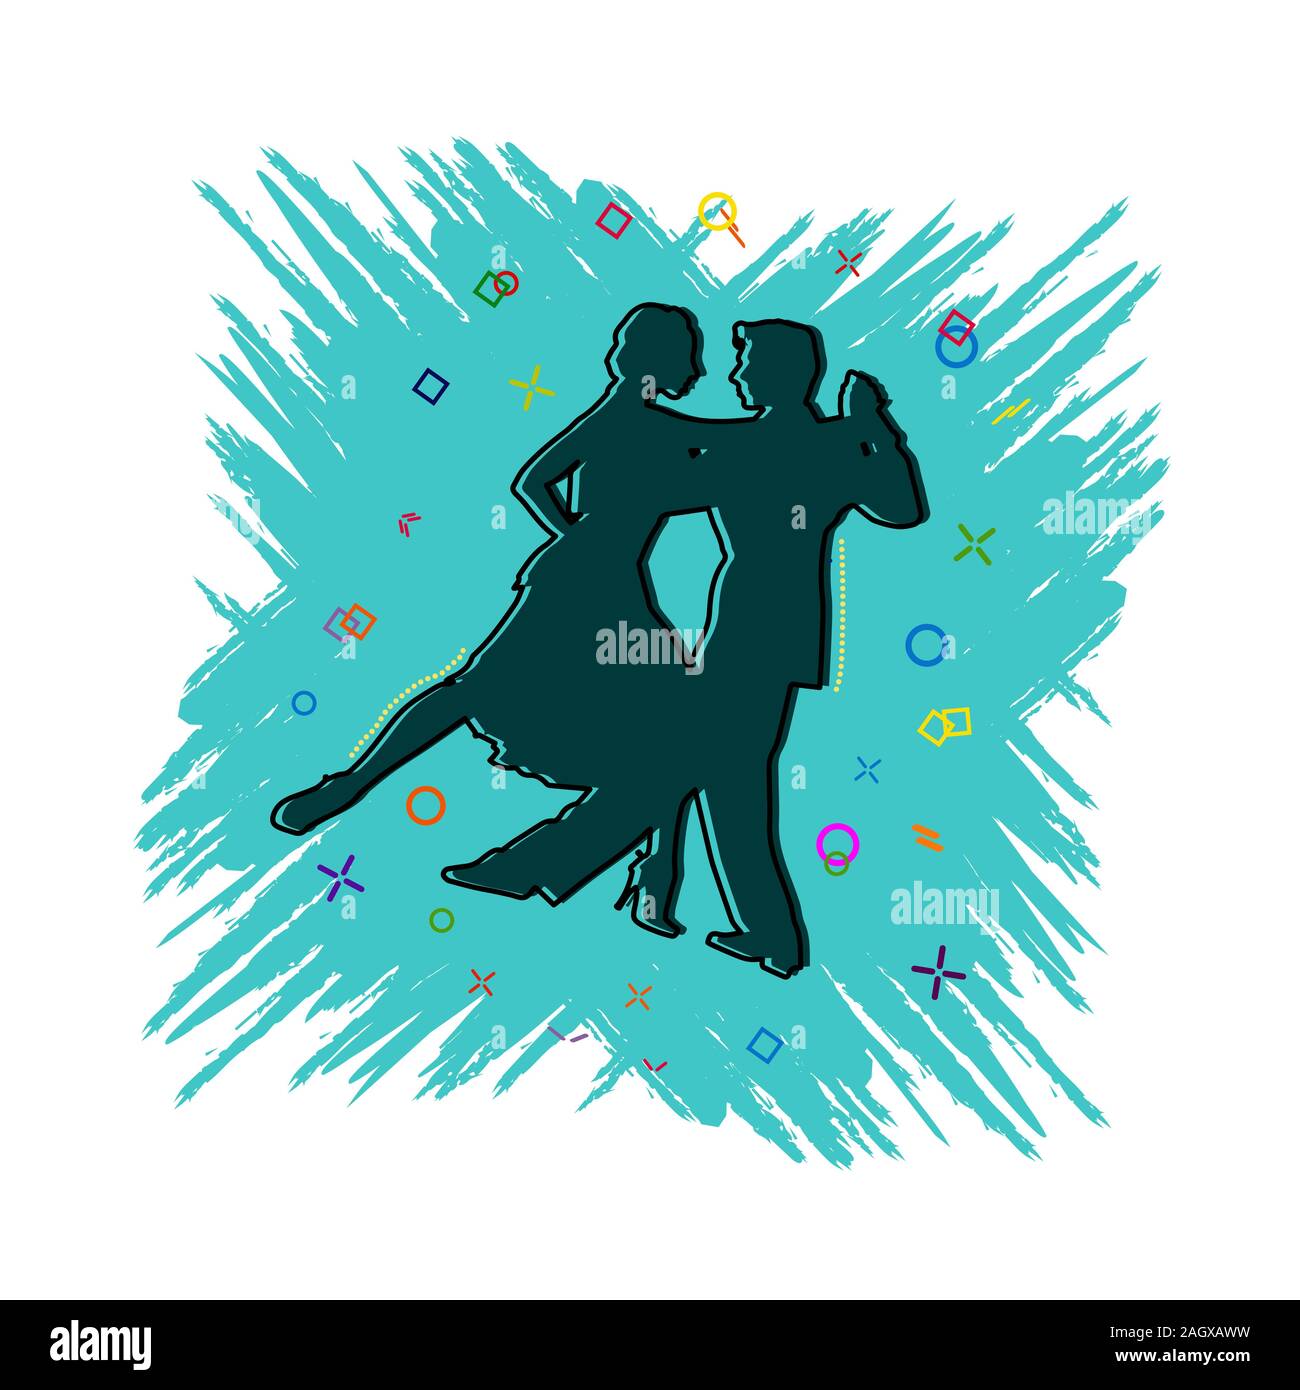 Pair dancing icon. Comic book style icon with splash effect. flat style. Isolated on white background. Stock Vector